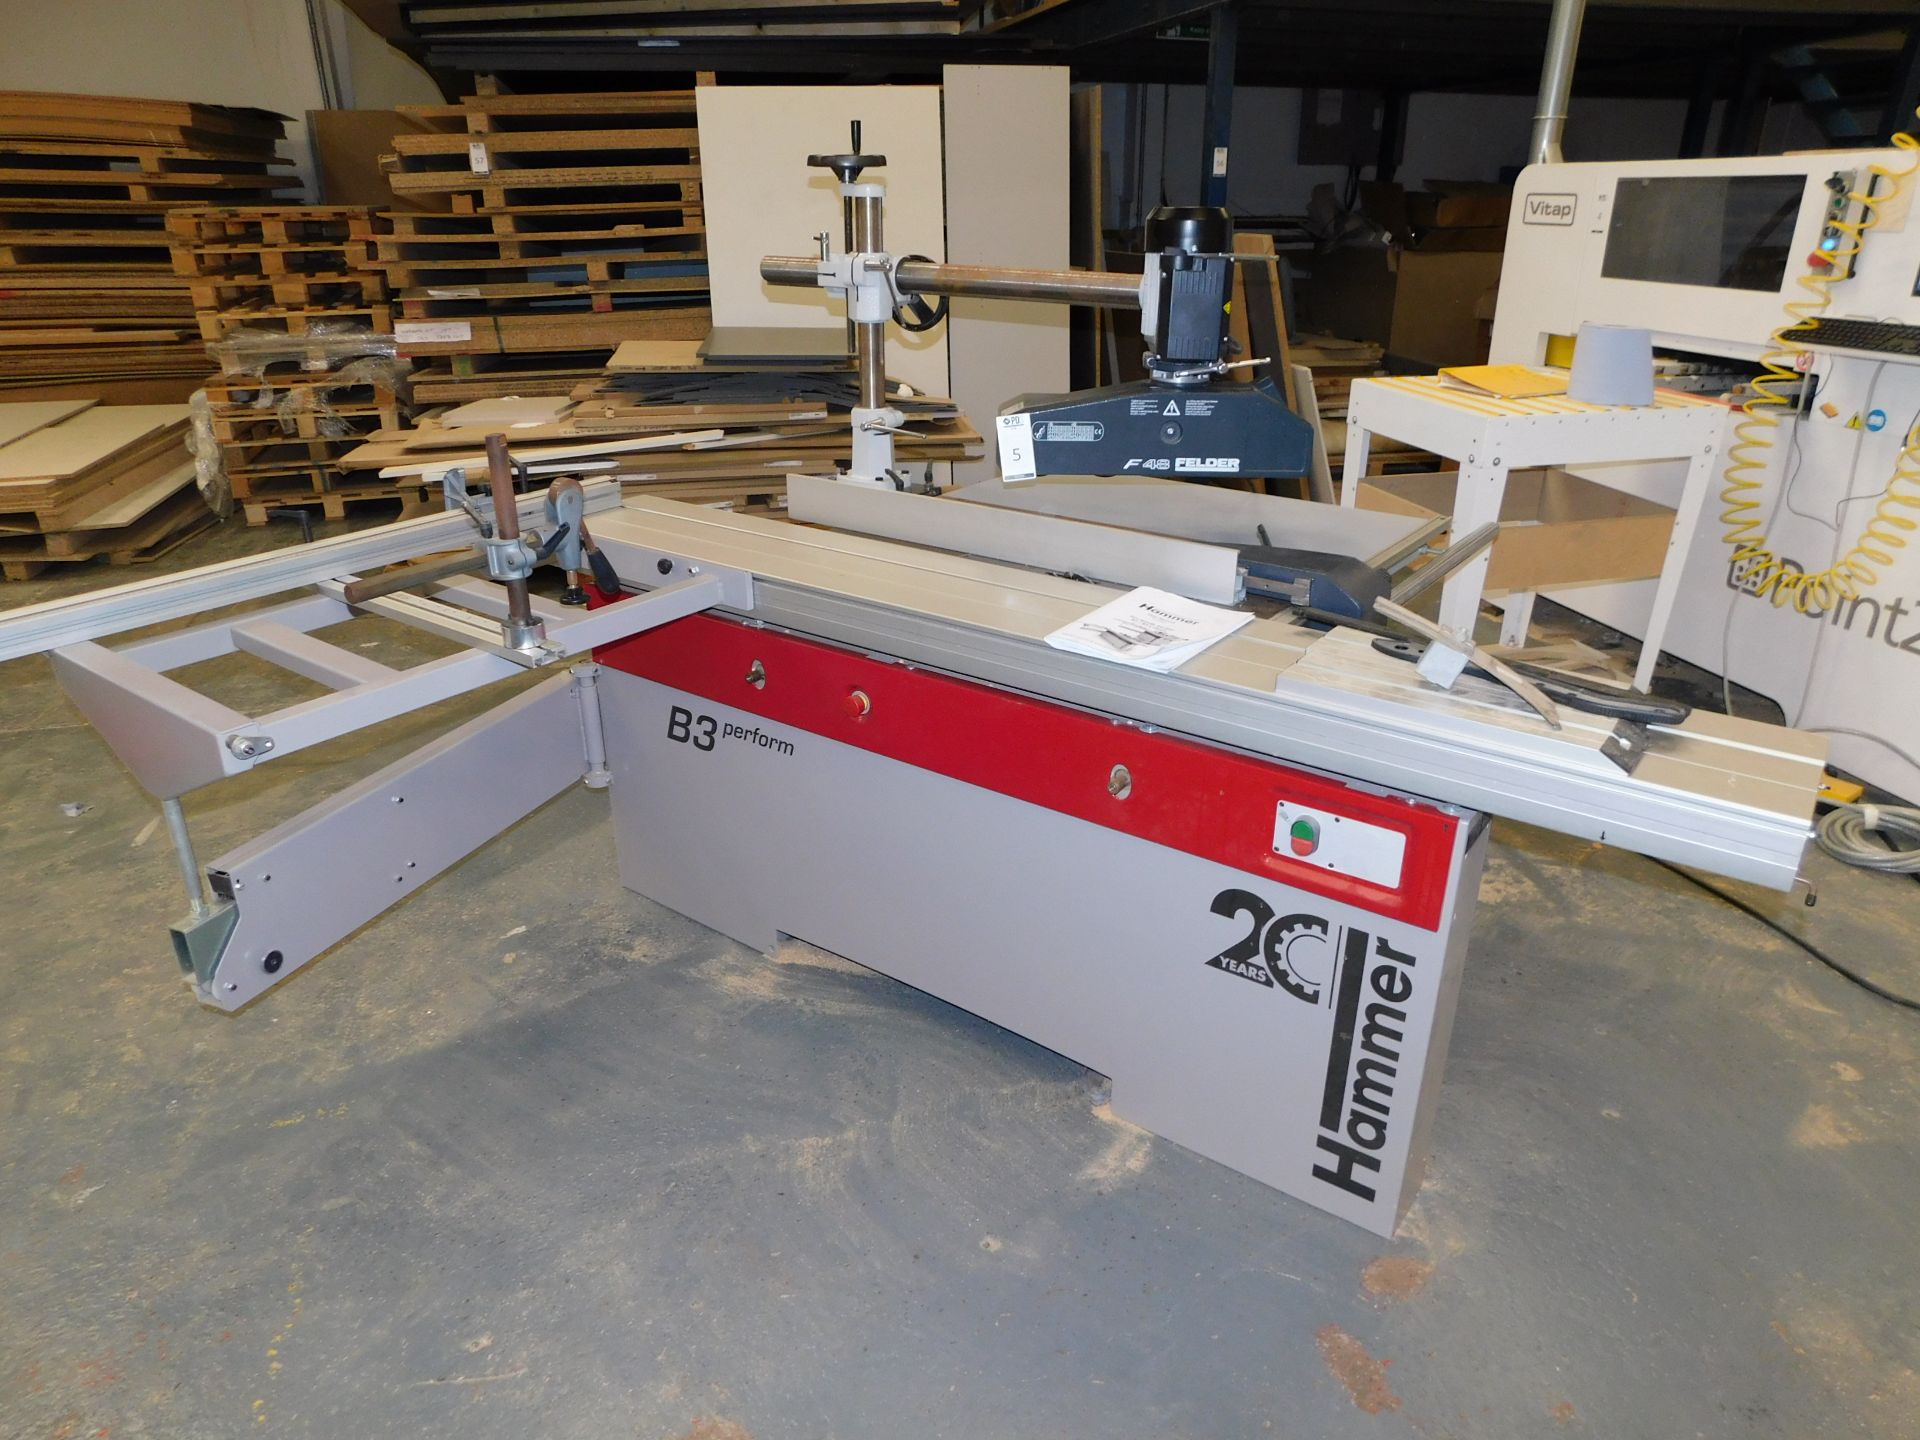 2018 Hammer B3 Perform Combination Sliding Table Saw/Moulder, Serial Number: 51.06.111.18 with